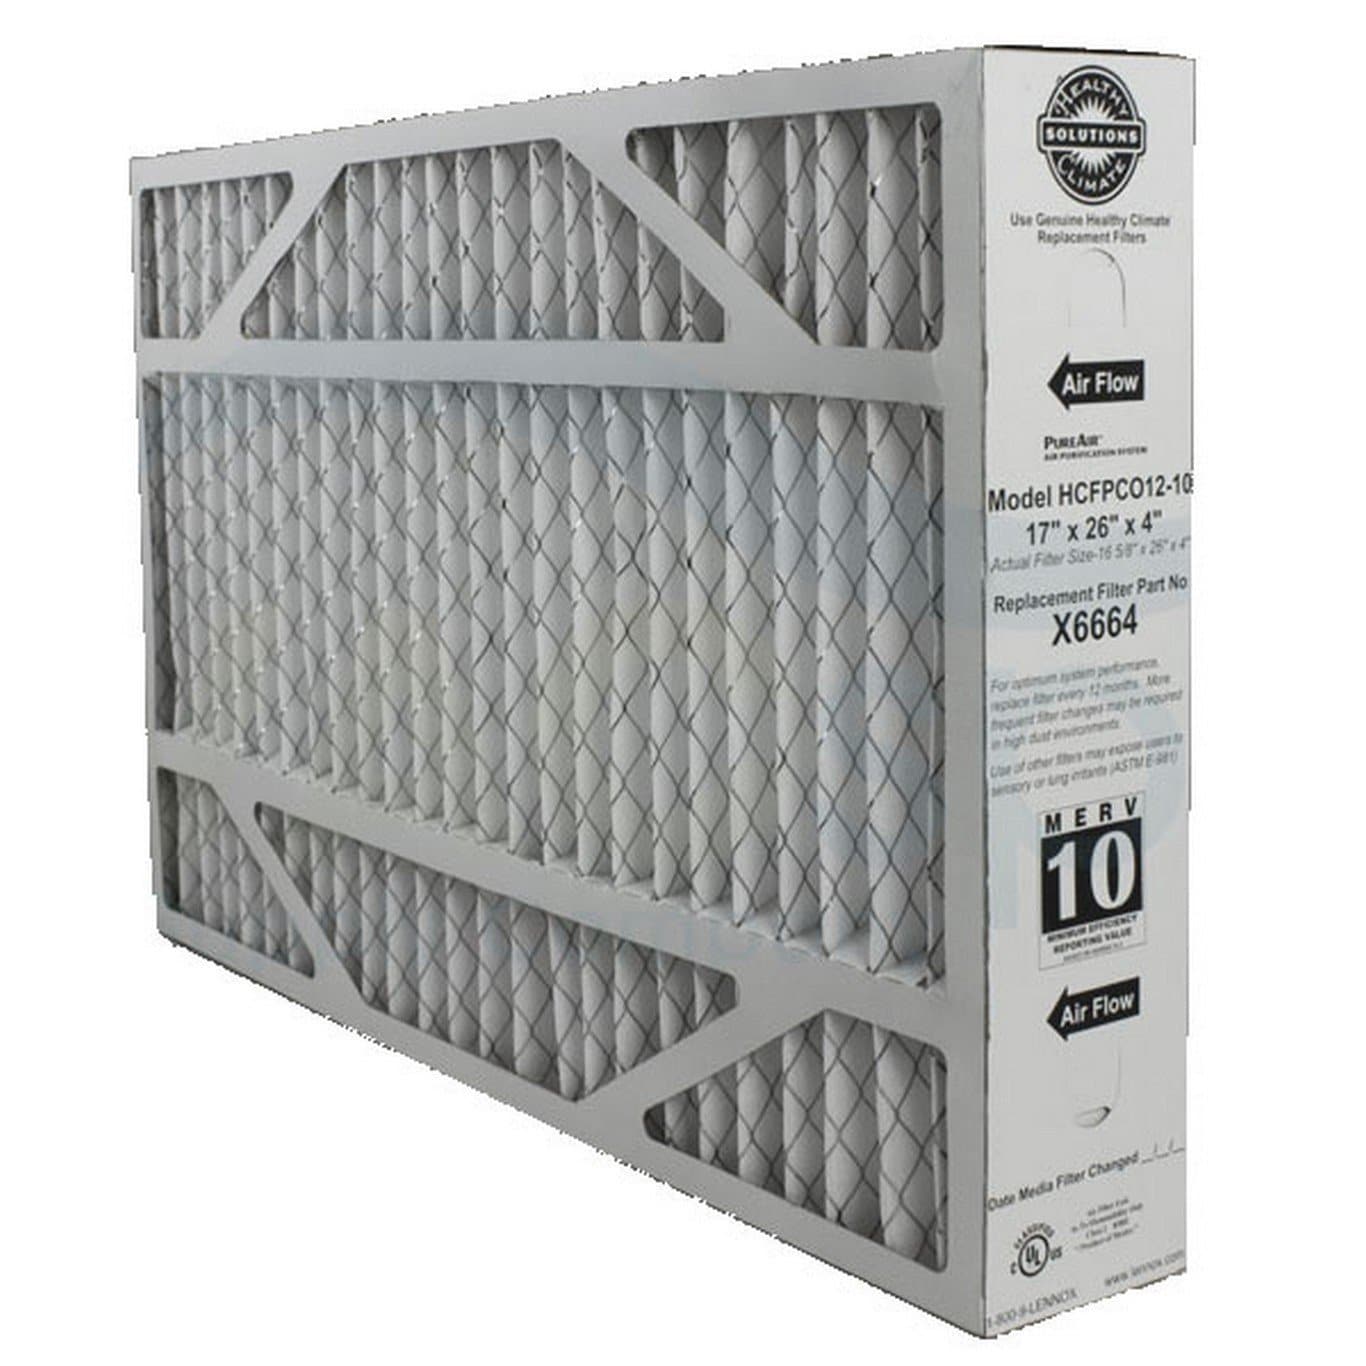 Lennox X6664 Furnace Filter (75X74) Replacement for PCO-12C - 17 x 26 x 4 (1 pack)